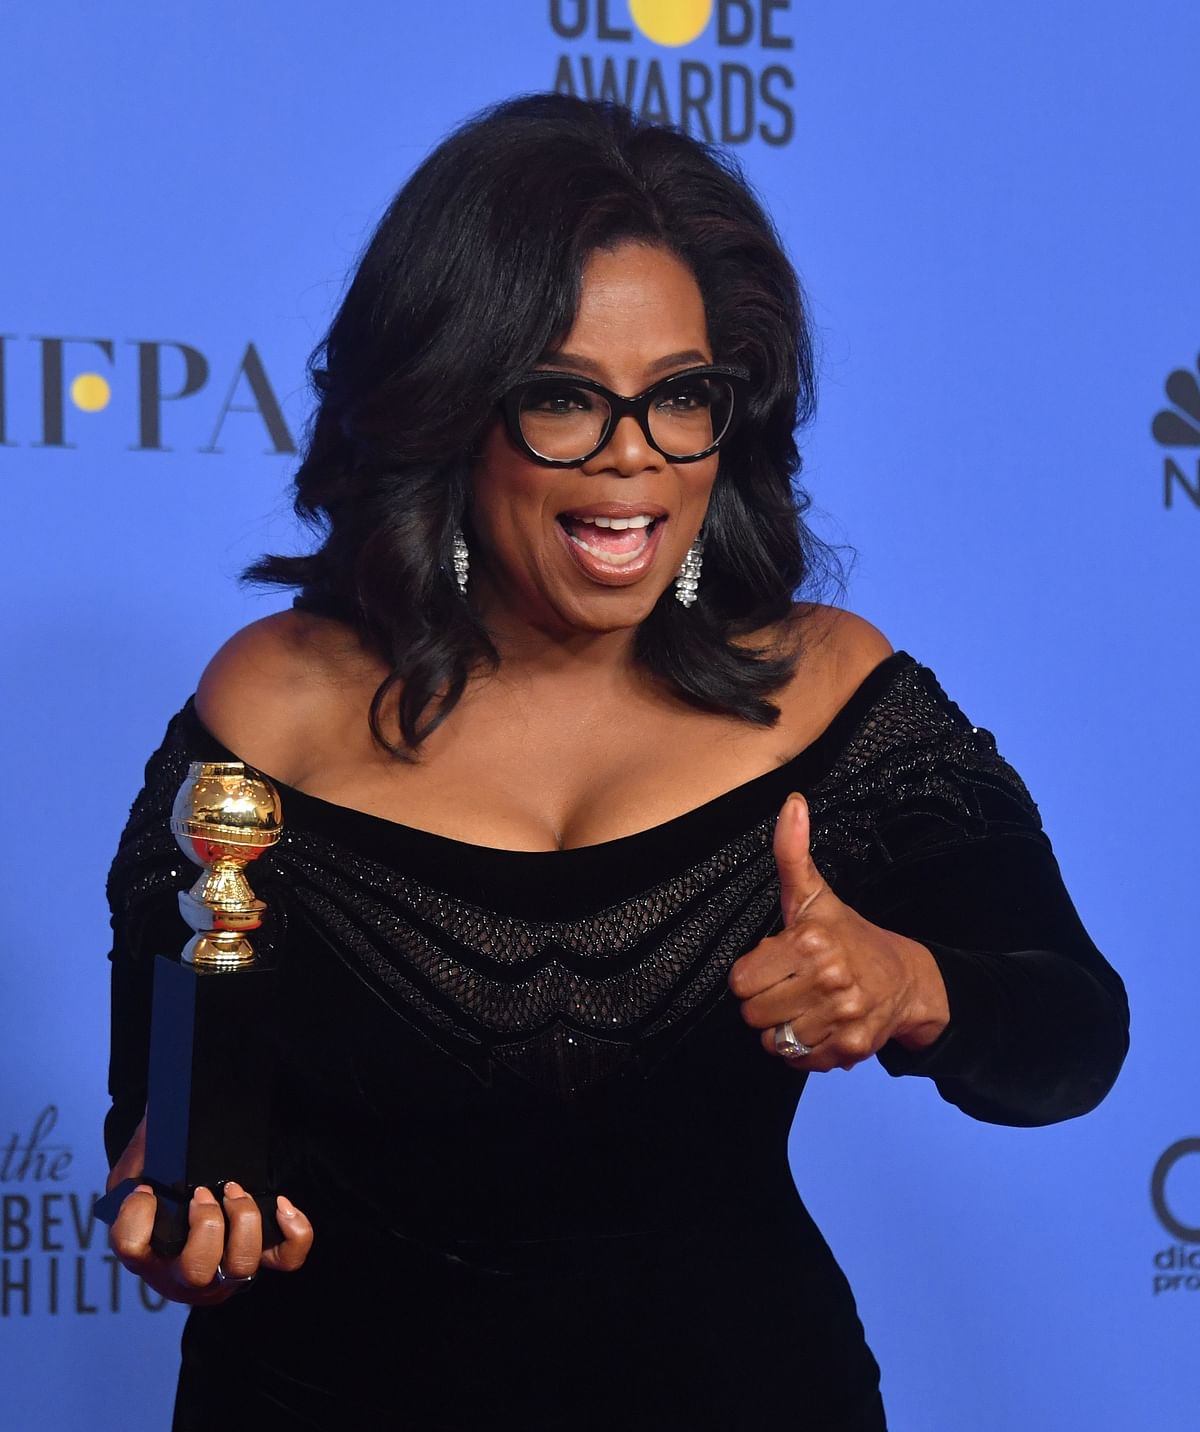 Oprah Winfrey poses with the Cecil B. DeMille Award during the 75th Golden Globe Awards in Beverly Hills, California on 7 January, 2018. Photo: AFP